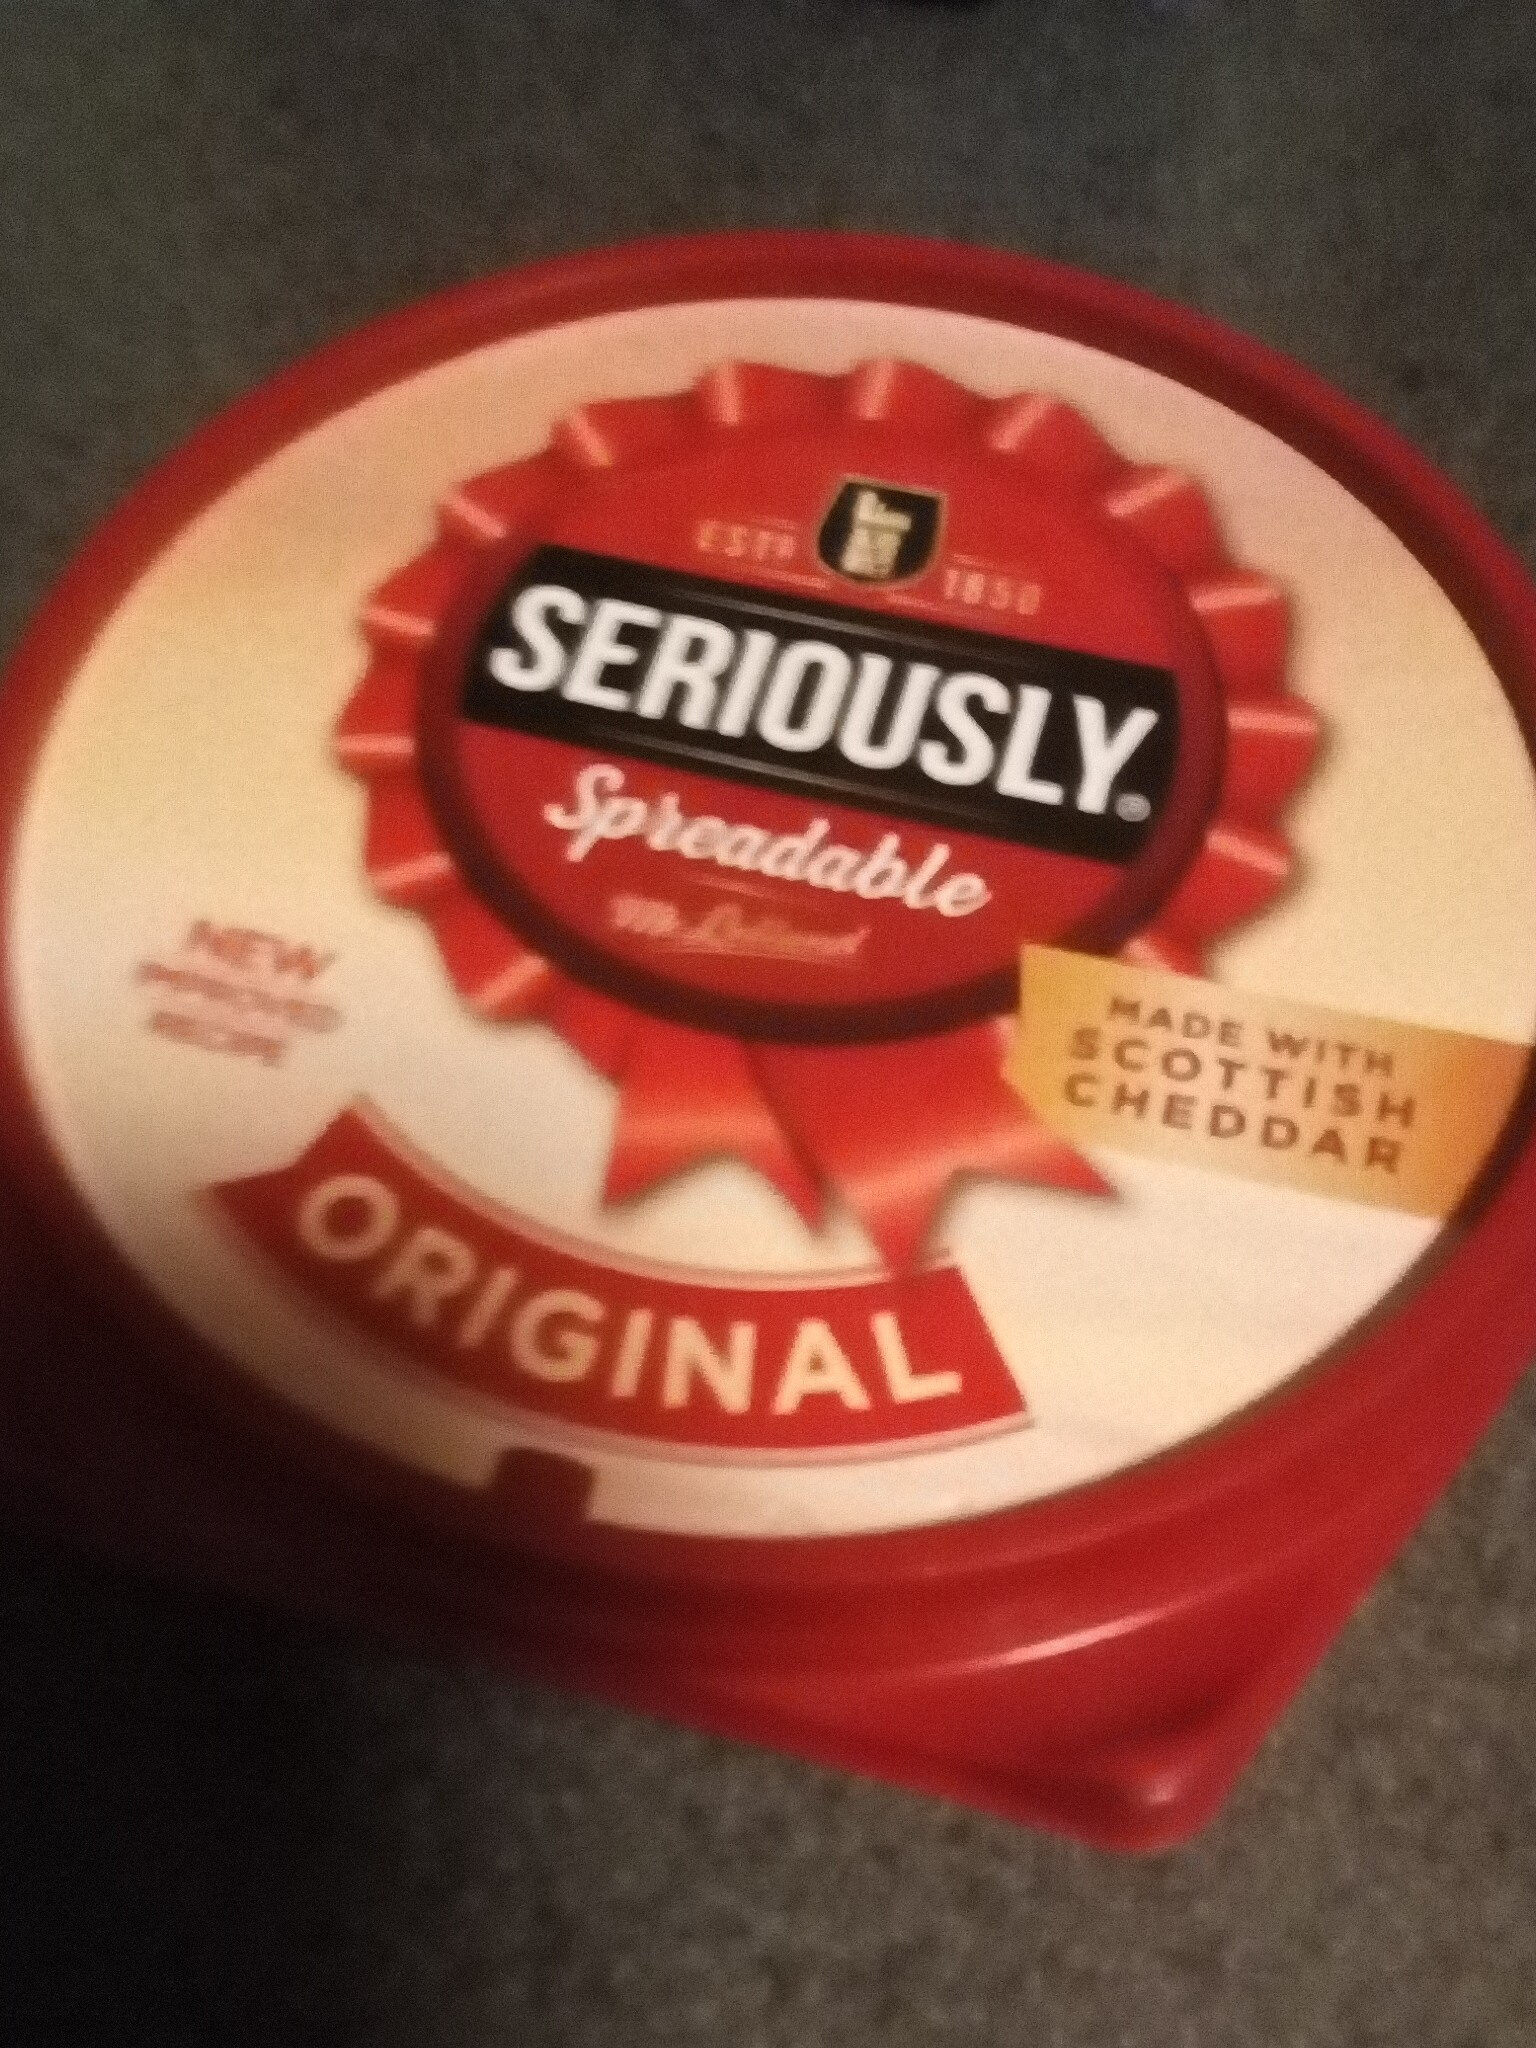 Seriously Spreadable Original - Product